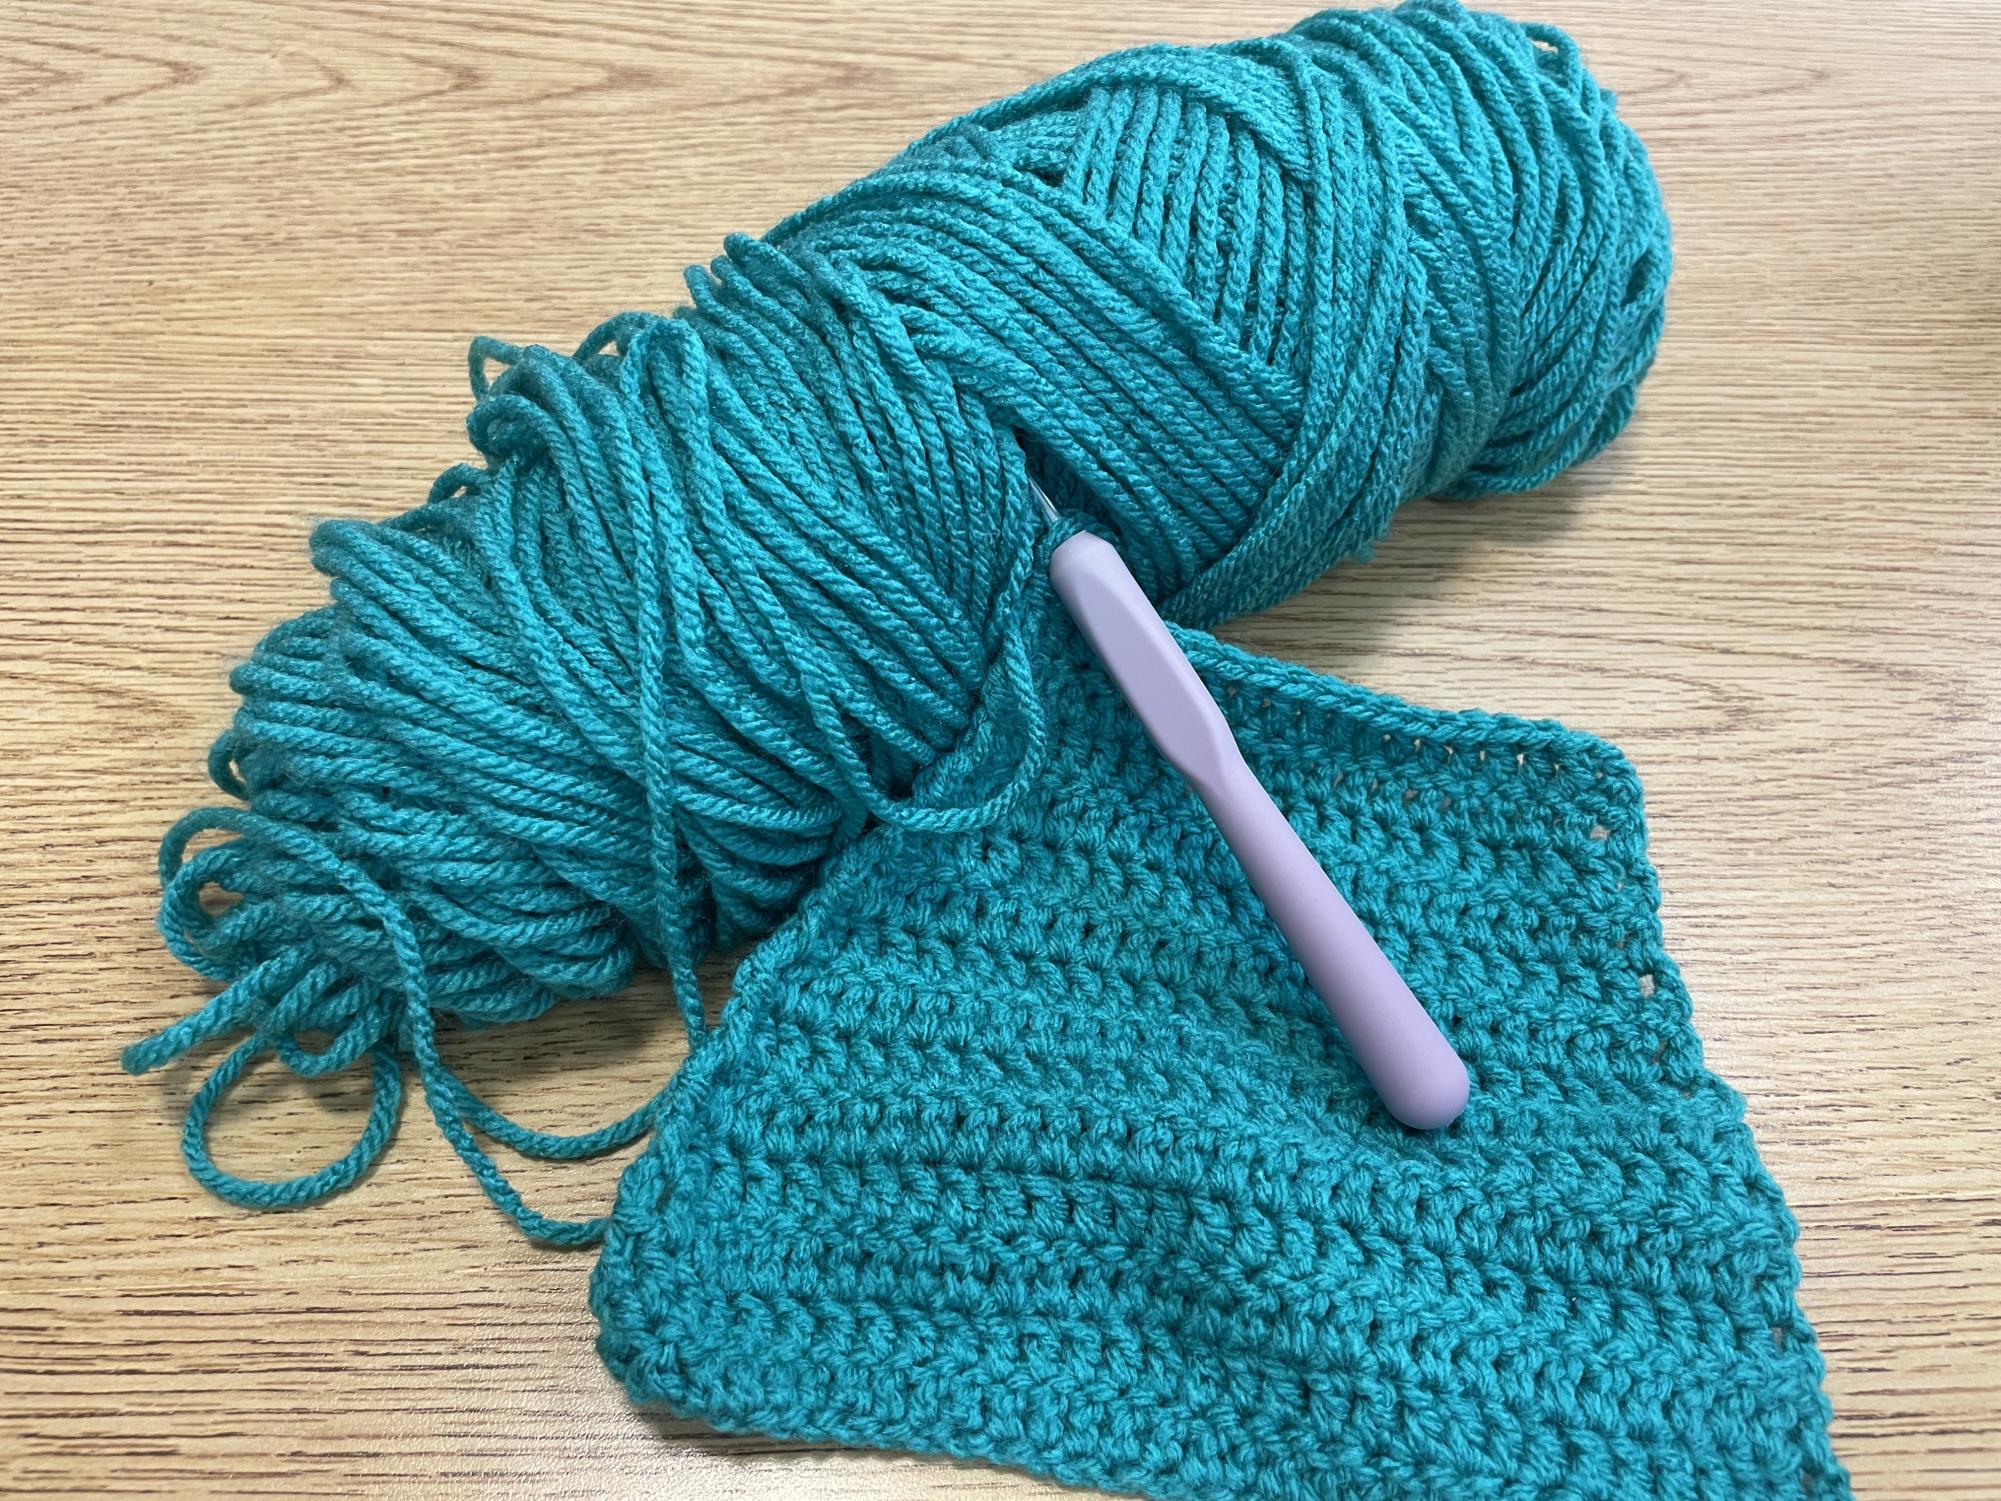 Skein of yarn and crochet hook, as well as an incomplete project. 